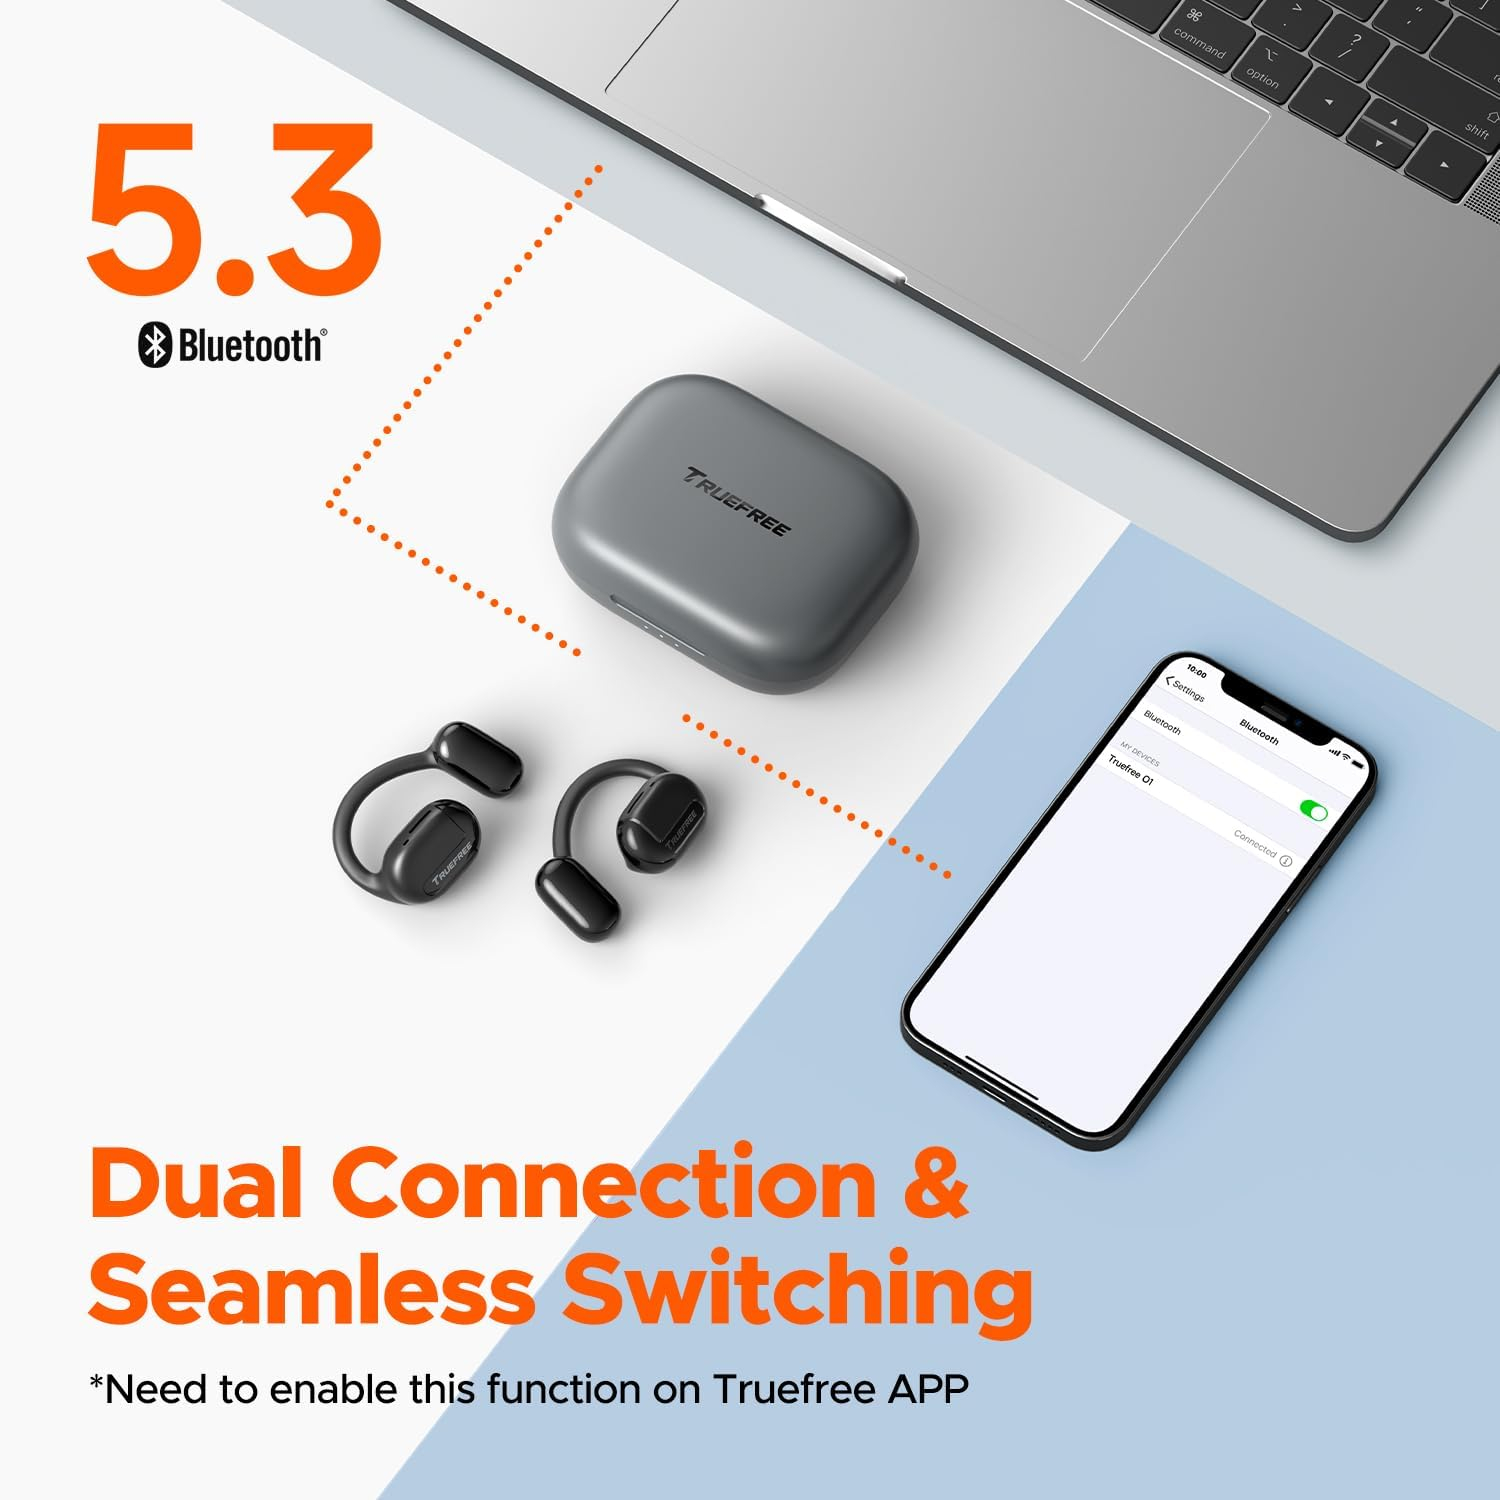 Truefree Open Ear Bluetooth 5.3 Headphones, Wireless Earbuds with Earhooks,  ENC Noise-Cancellation, Immersive Stereo Sound by 16.2mm Driver,4 Mics